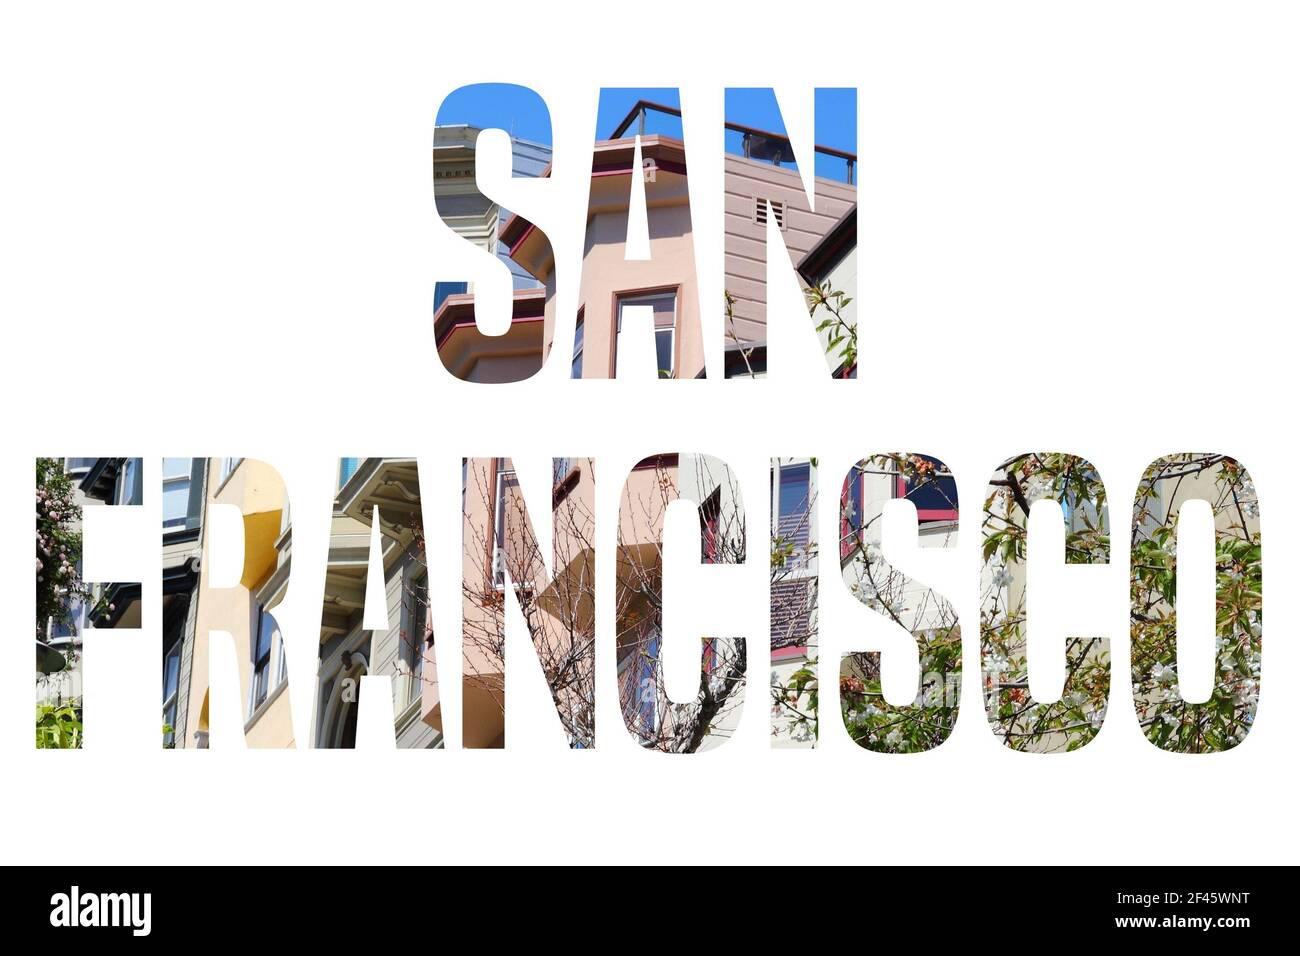 San Francisco, California - city name sign with photo in background. Isolated on white. Stock Photo